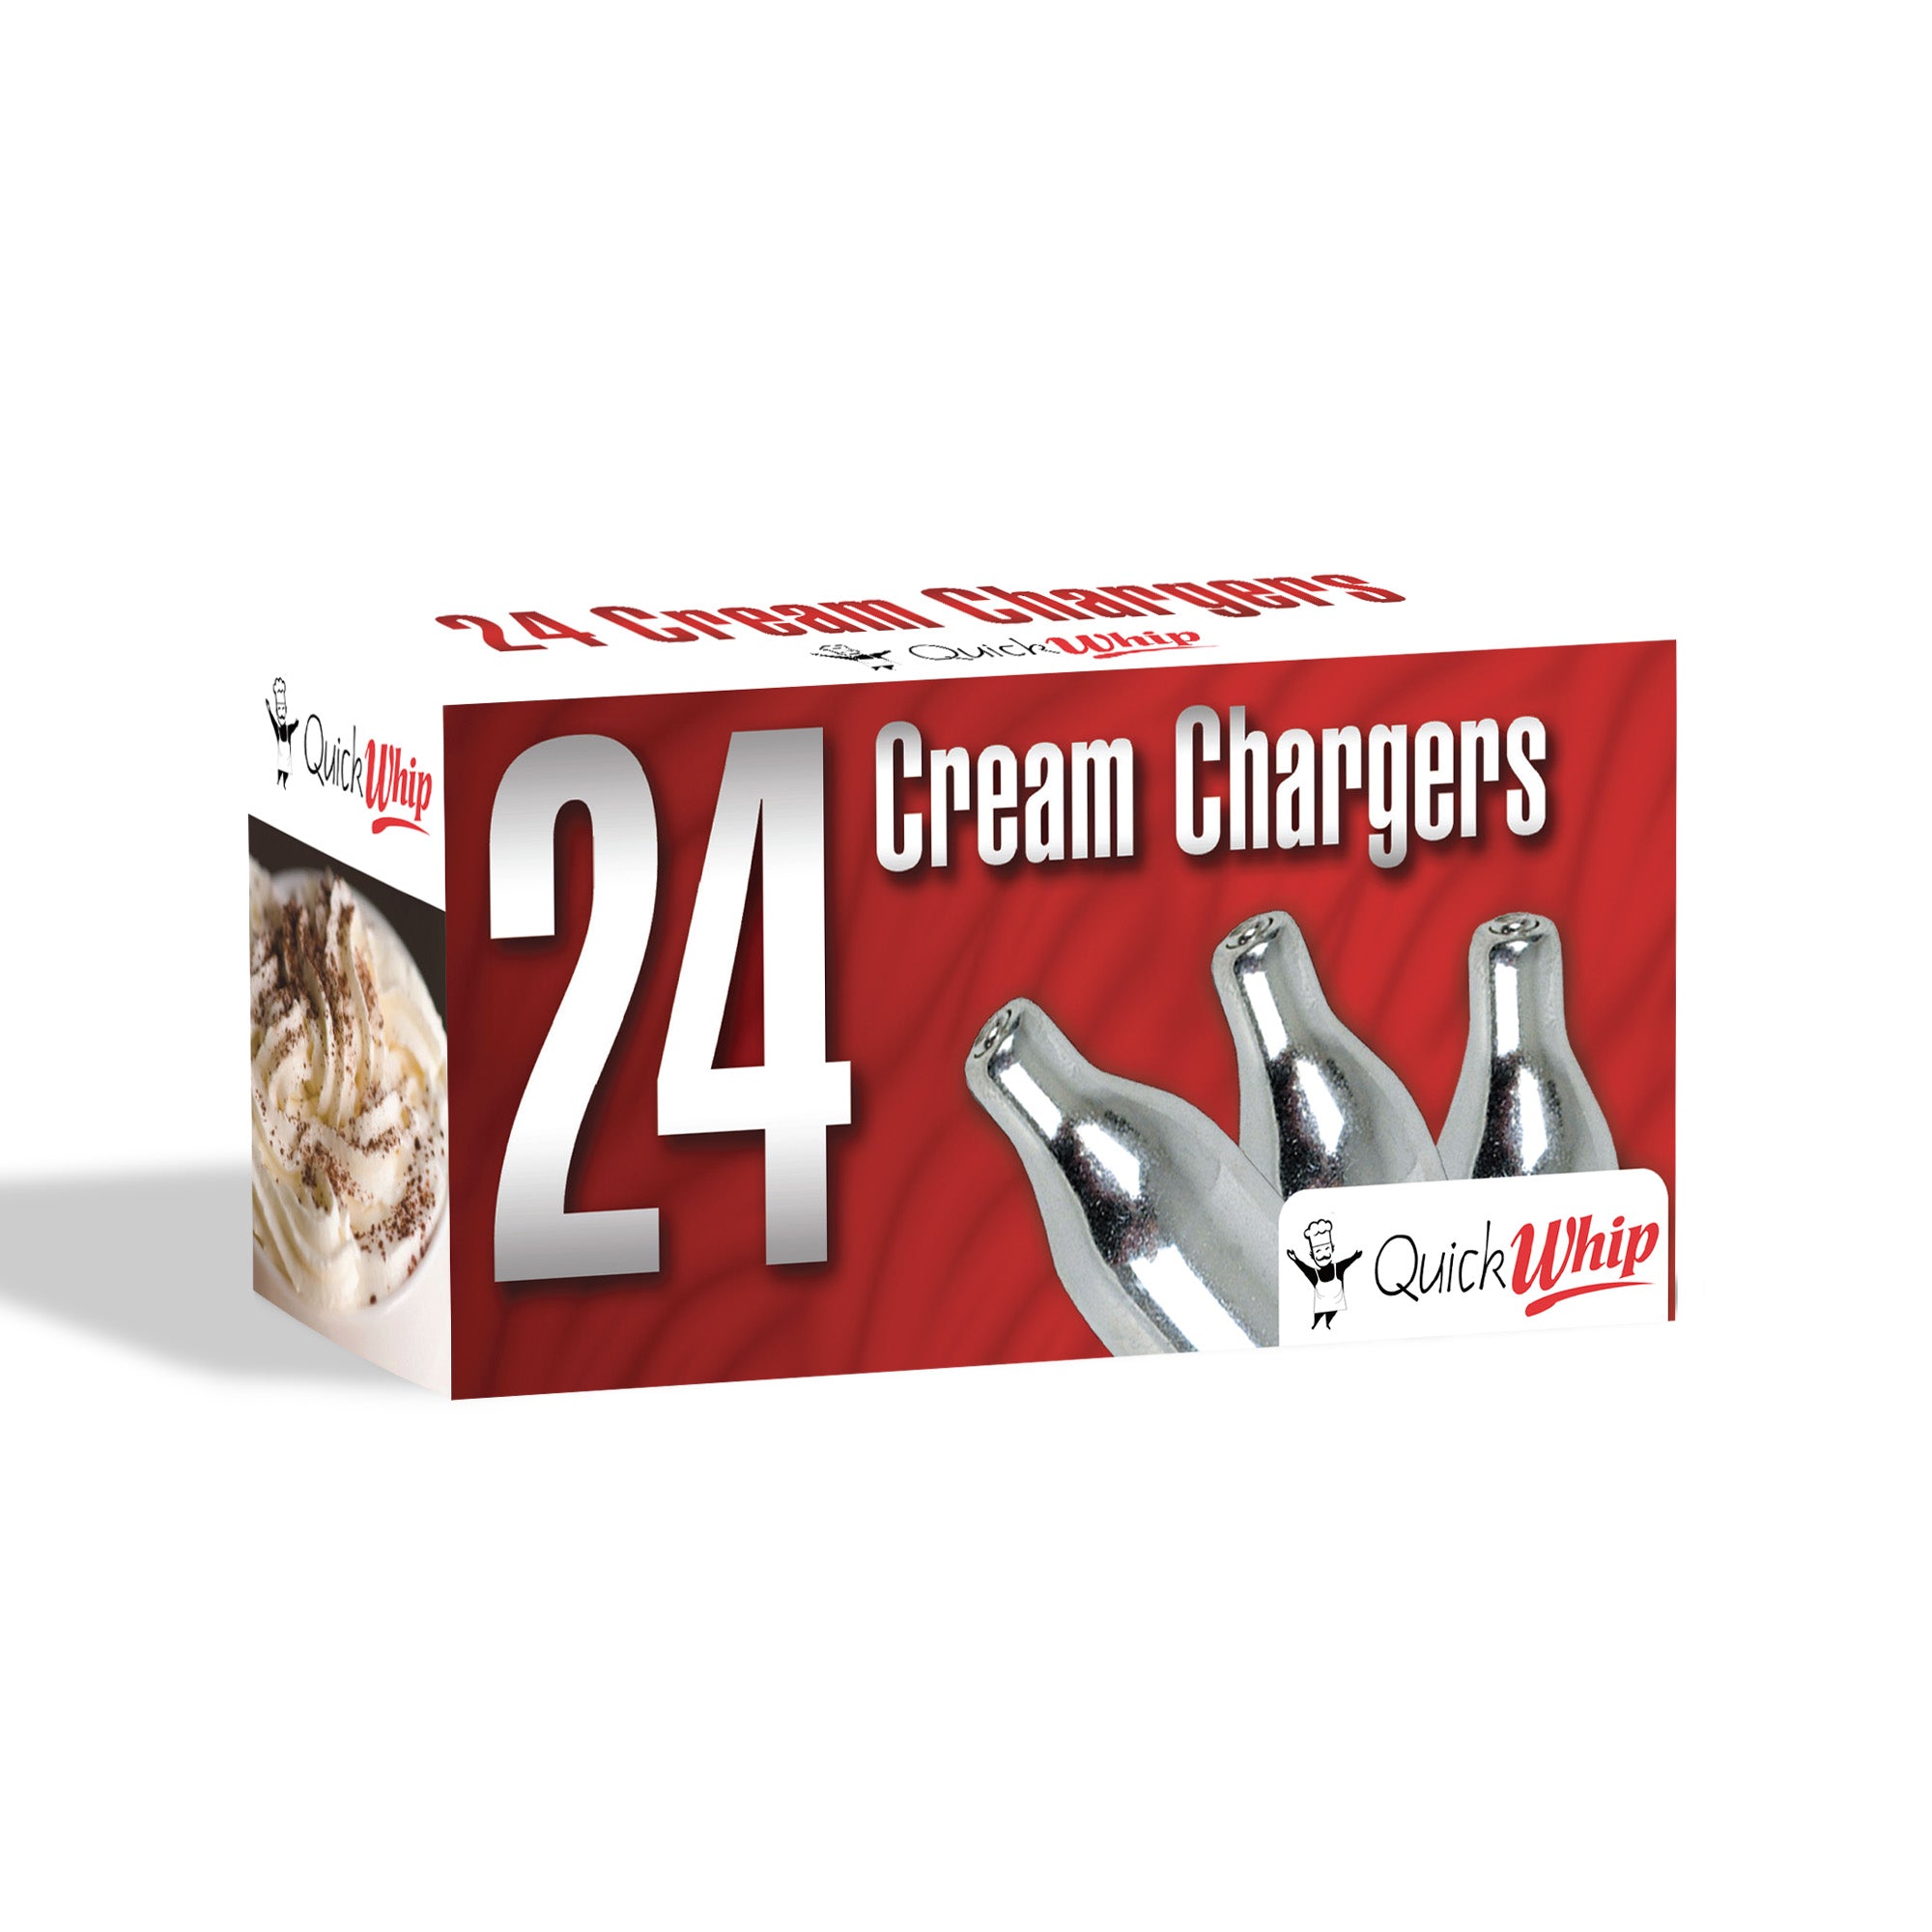 600 QuickWhip Cream Chargers - 25 x 24 pack (1 Carton)